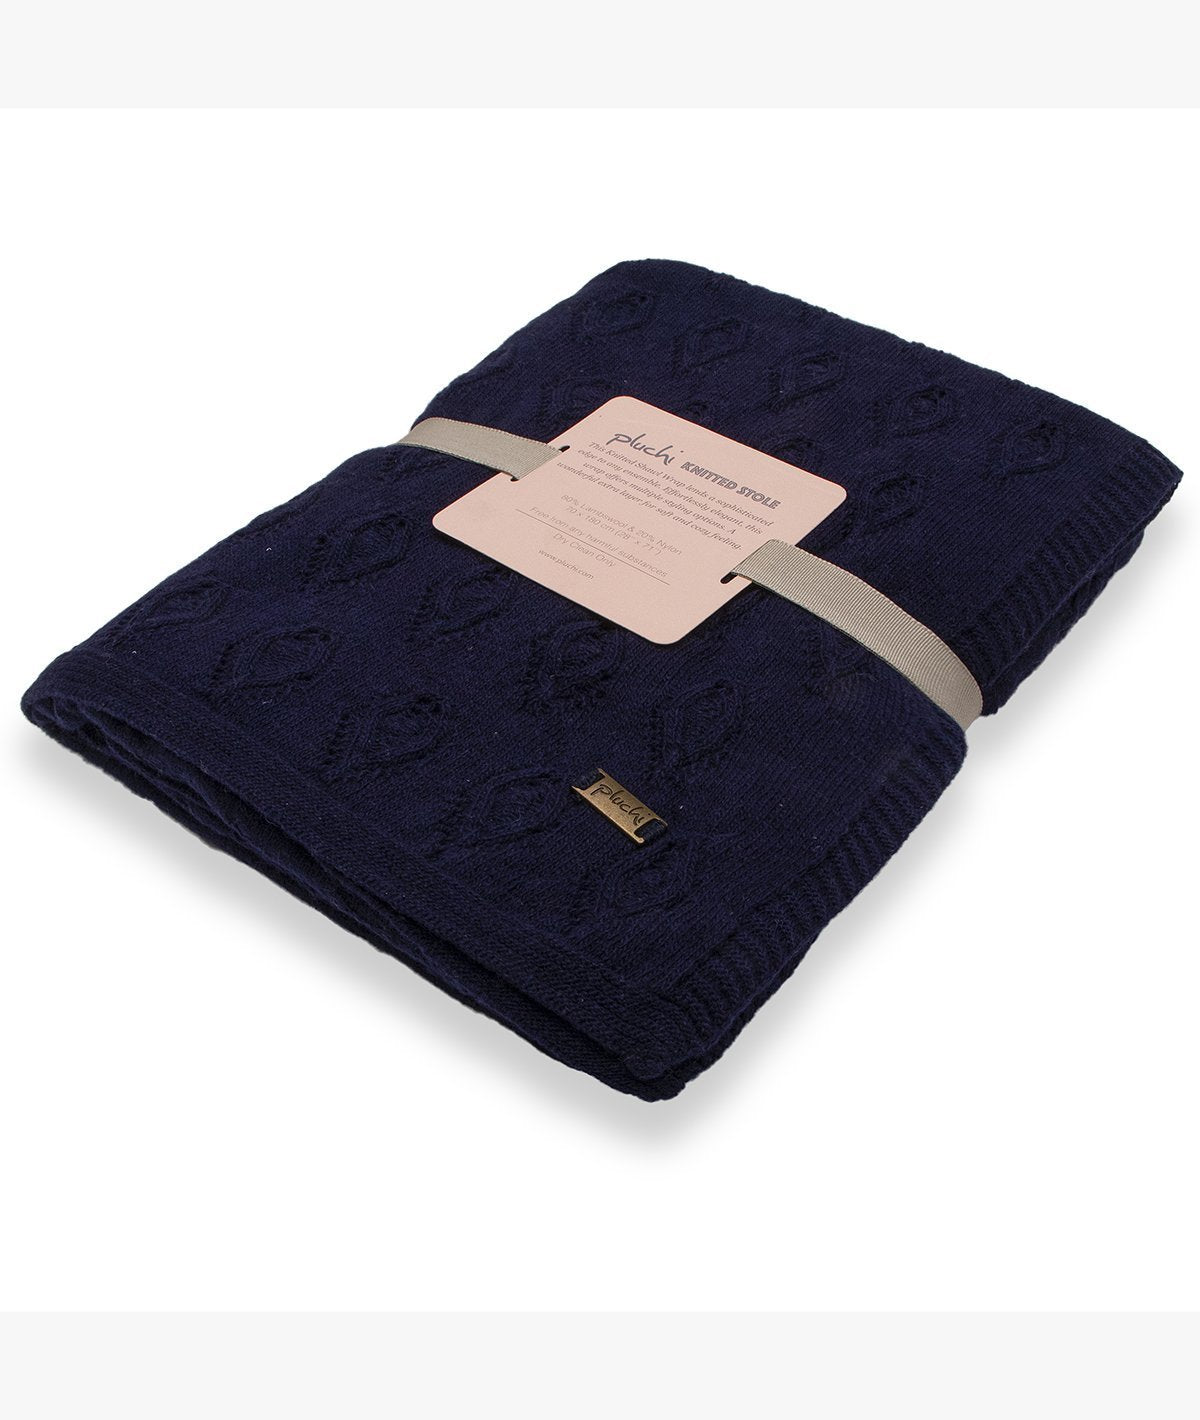 Avery - Navy Color Lambswool & Nylon Knitted Shawl Wrap